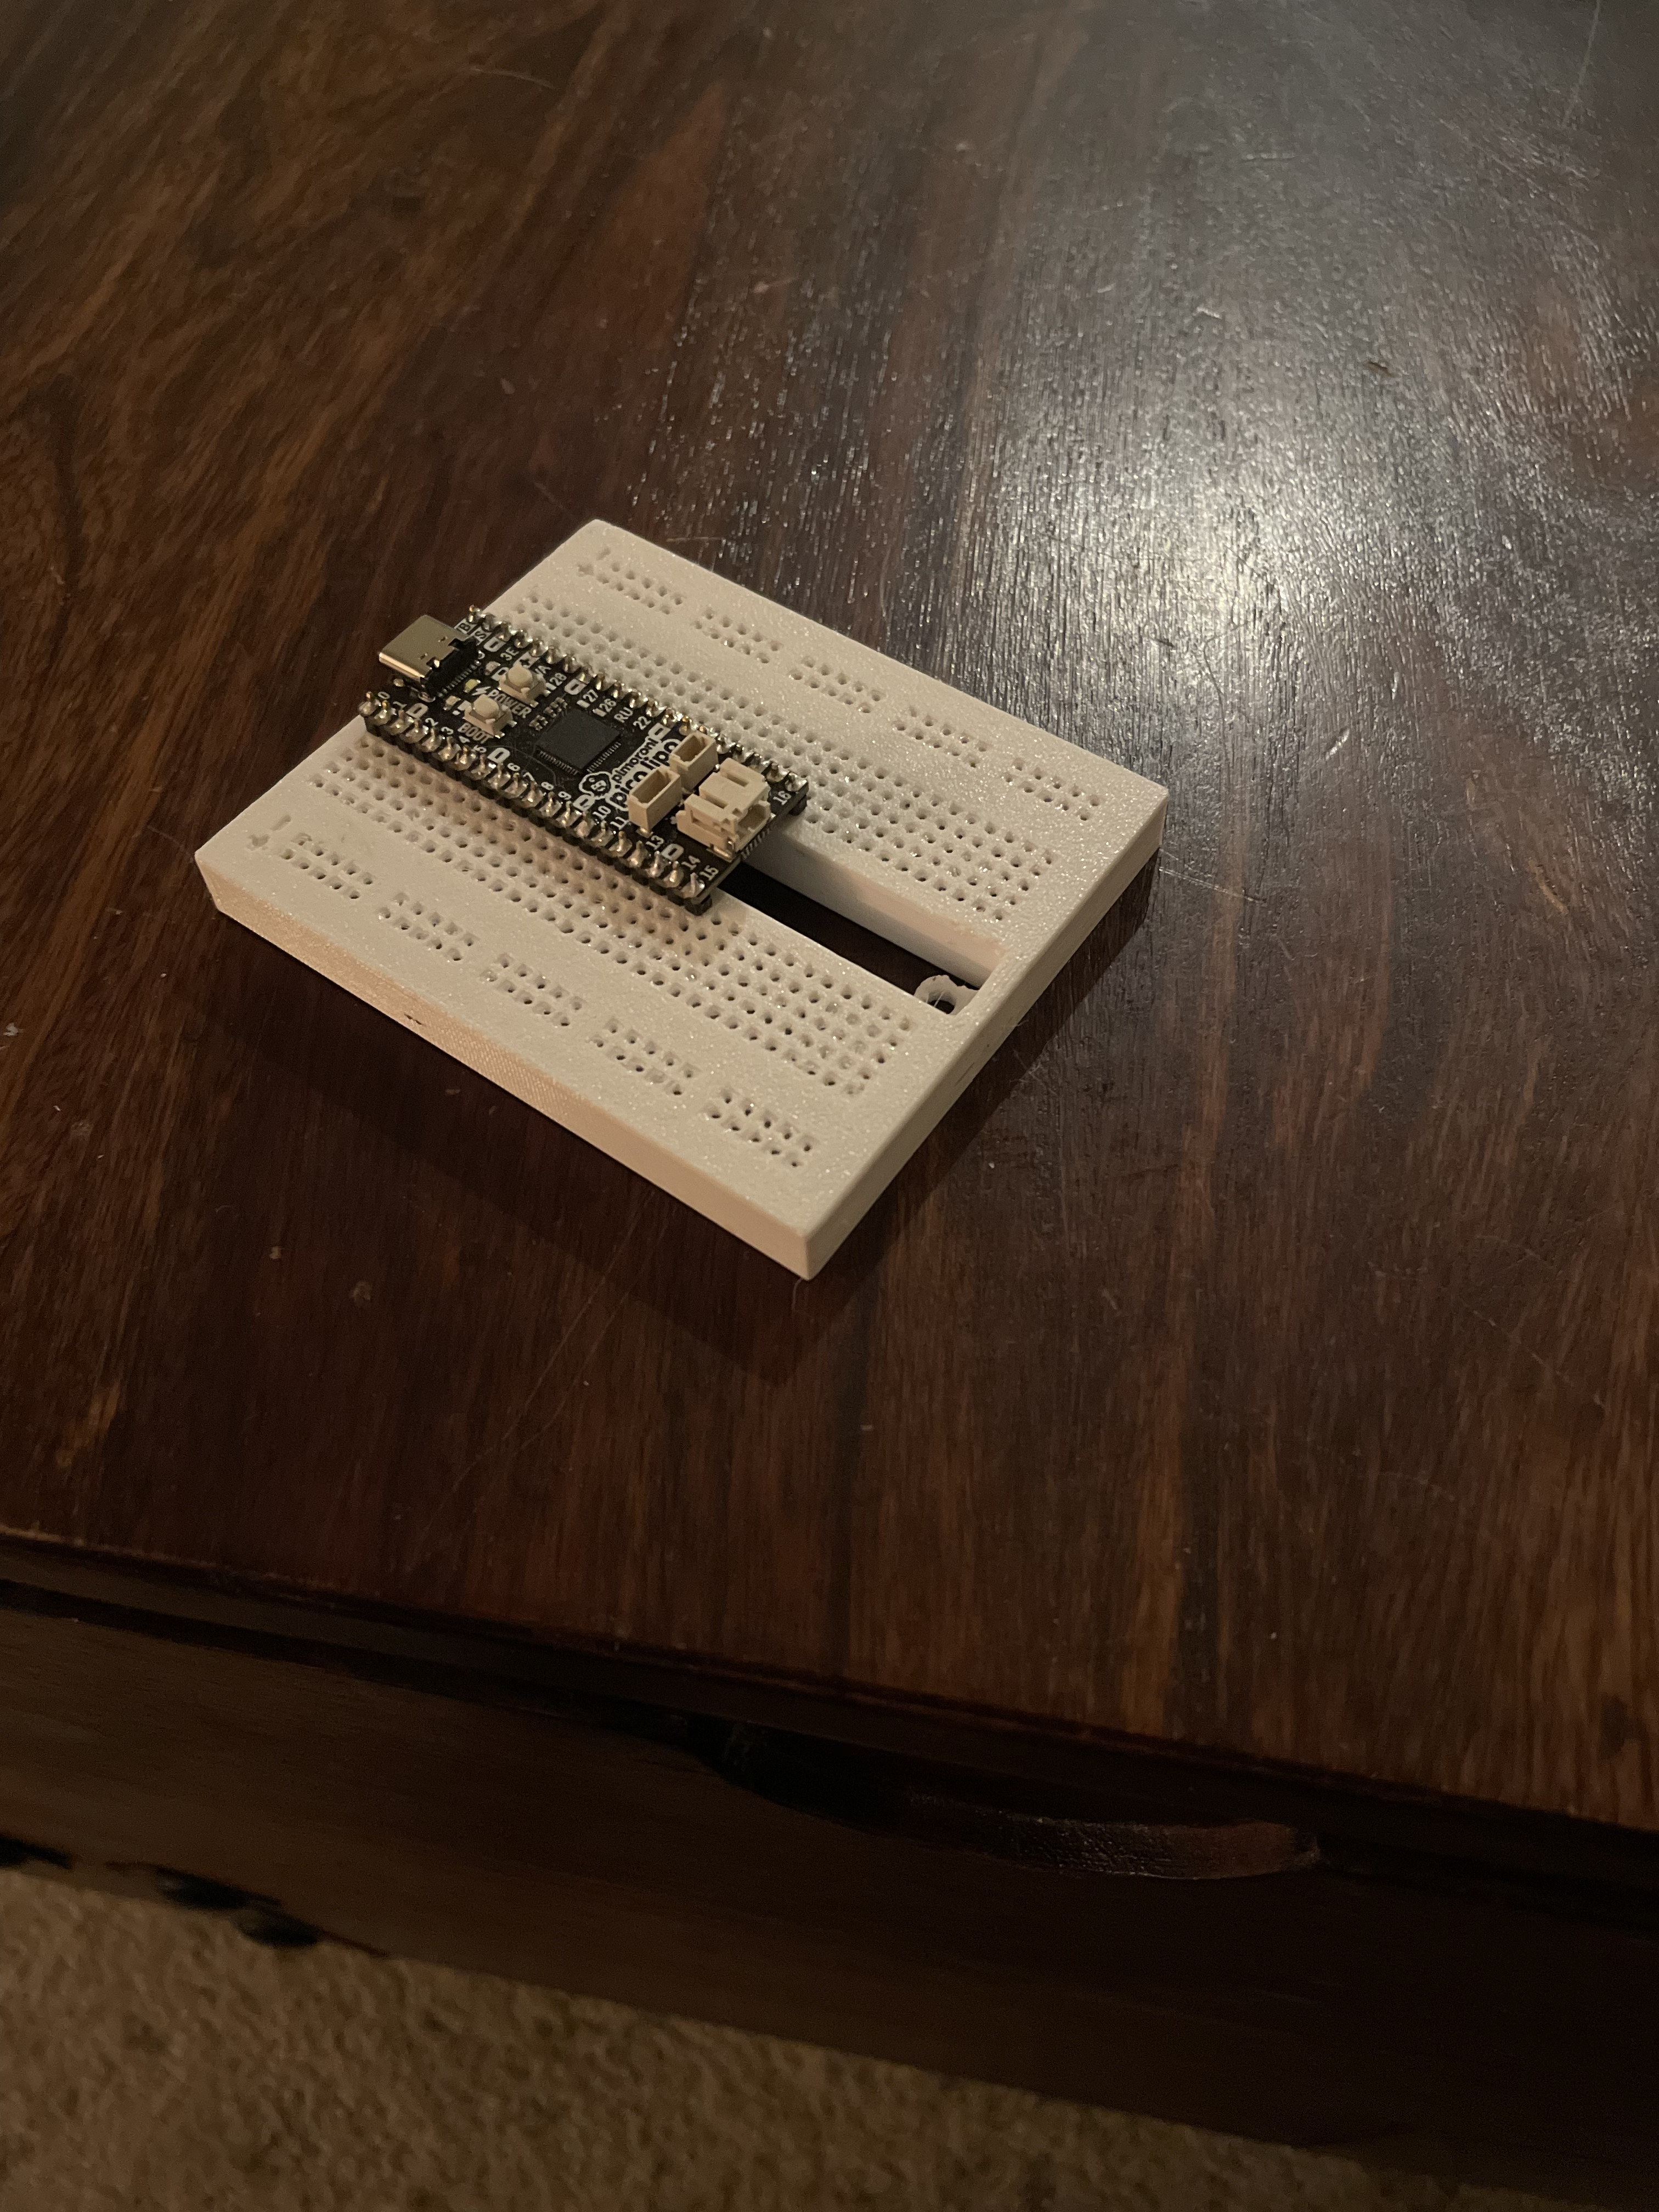 Raspberry Pi Pico Breadboard - centers the Pico (compatible with Teensy and other boards!)